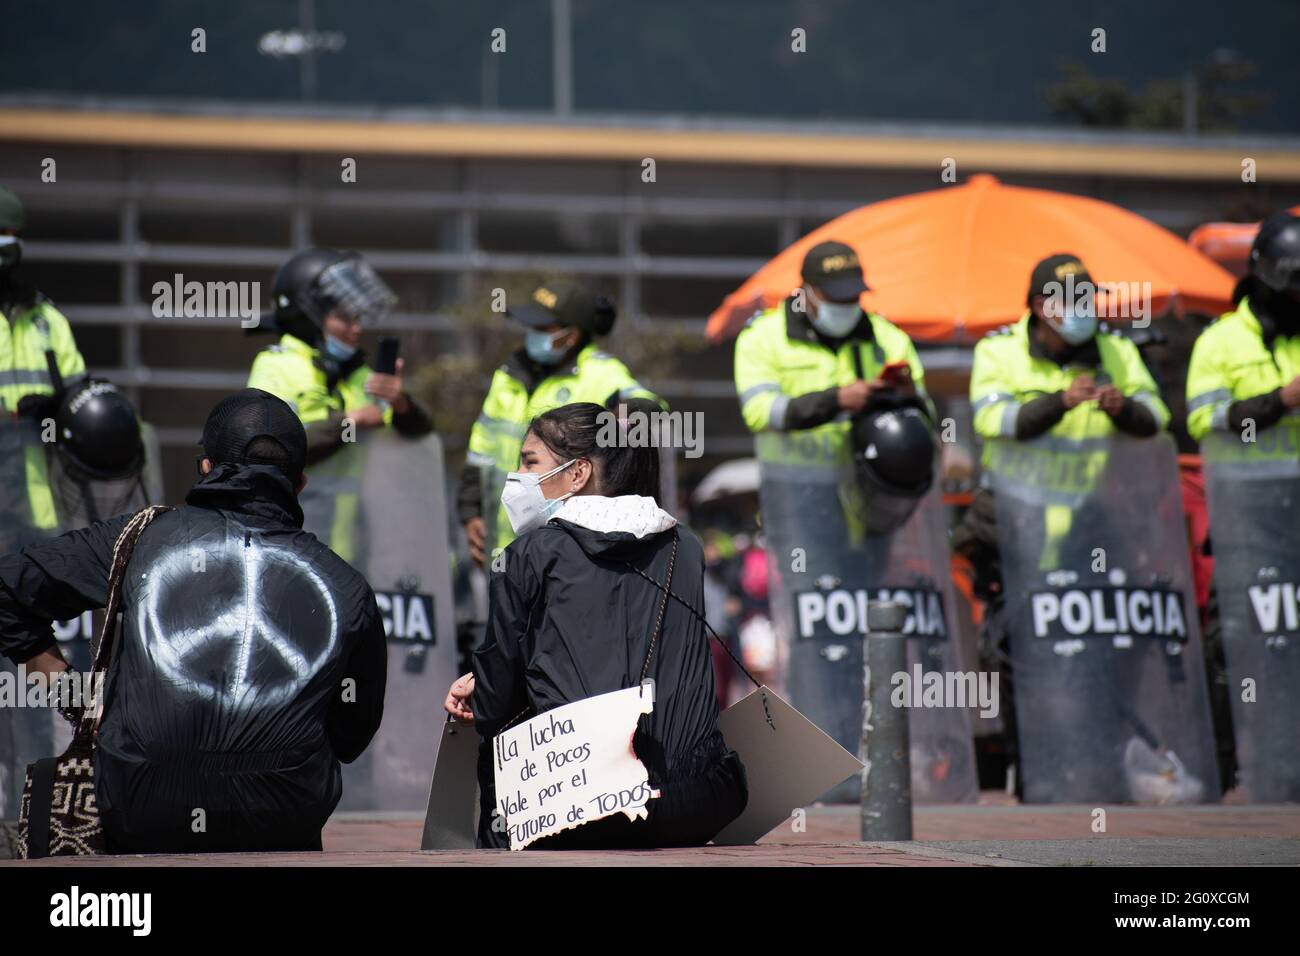 Bogota, Cundinamarca, Colombia. 2nd June, 2021. With the police behind her, a protester holds up a sign that reads ''Everyone's Fight for Everyone's Values.'' on a new day of anti-government protest in BogotÃ¡, Colombia against the government of President IvÃ¡n Duque and police brutality on June 2, 2021 Credit: Daniel Romero/LongVisual/ZUMA Wire/Alamy Live News Stock Photo